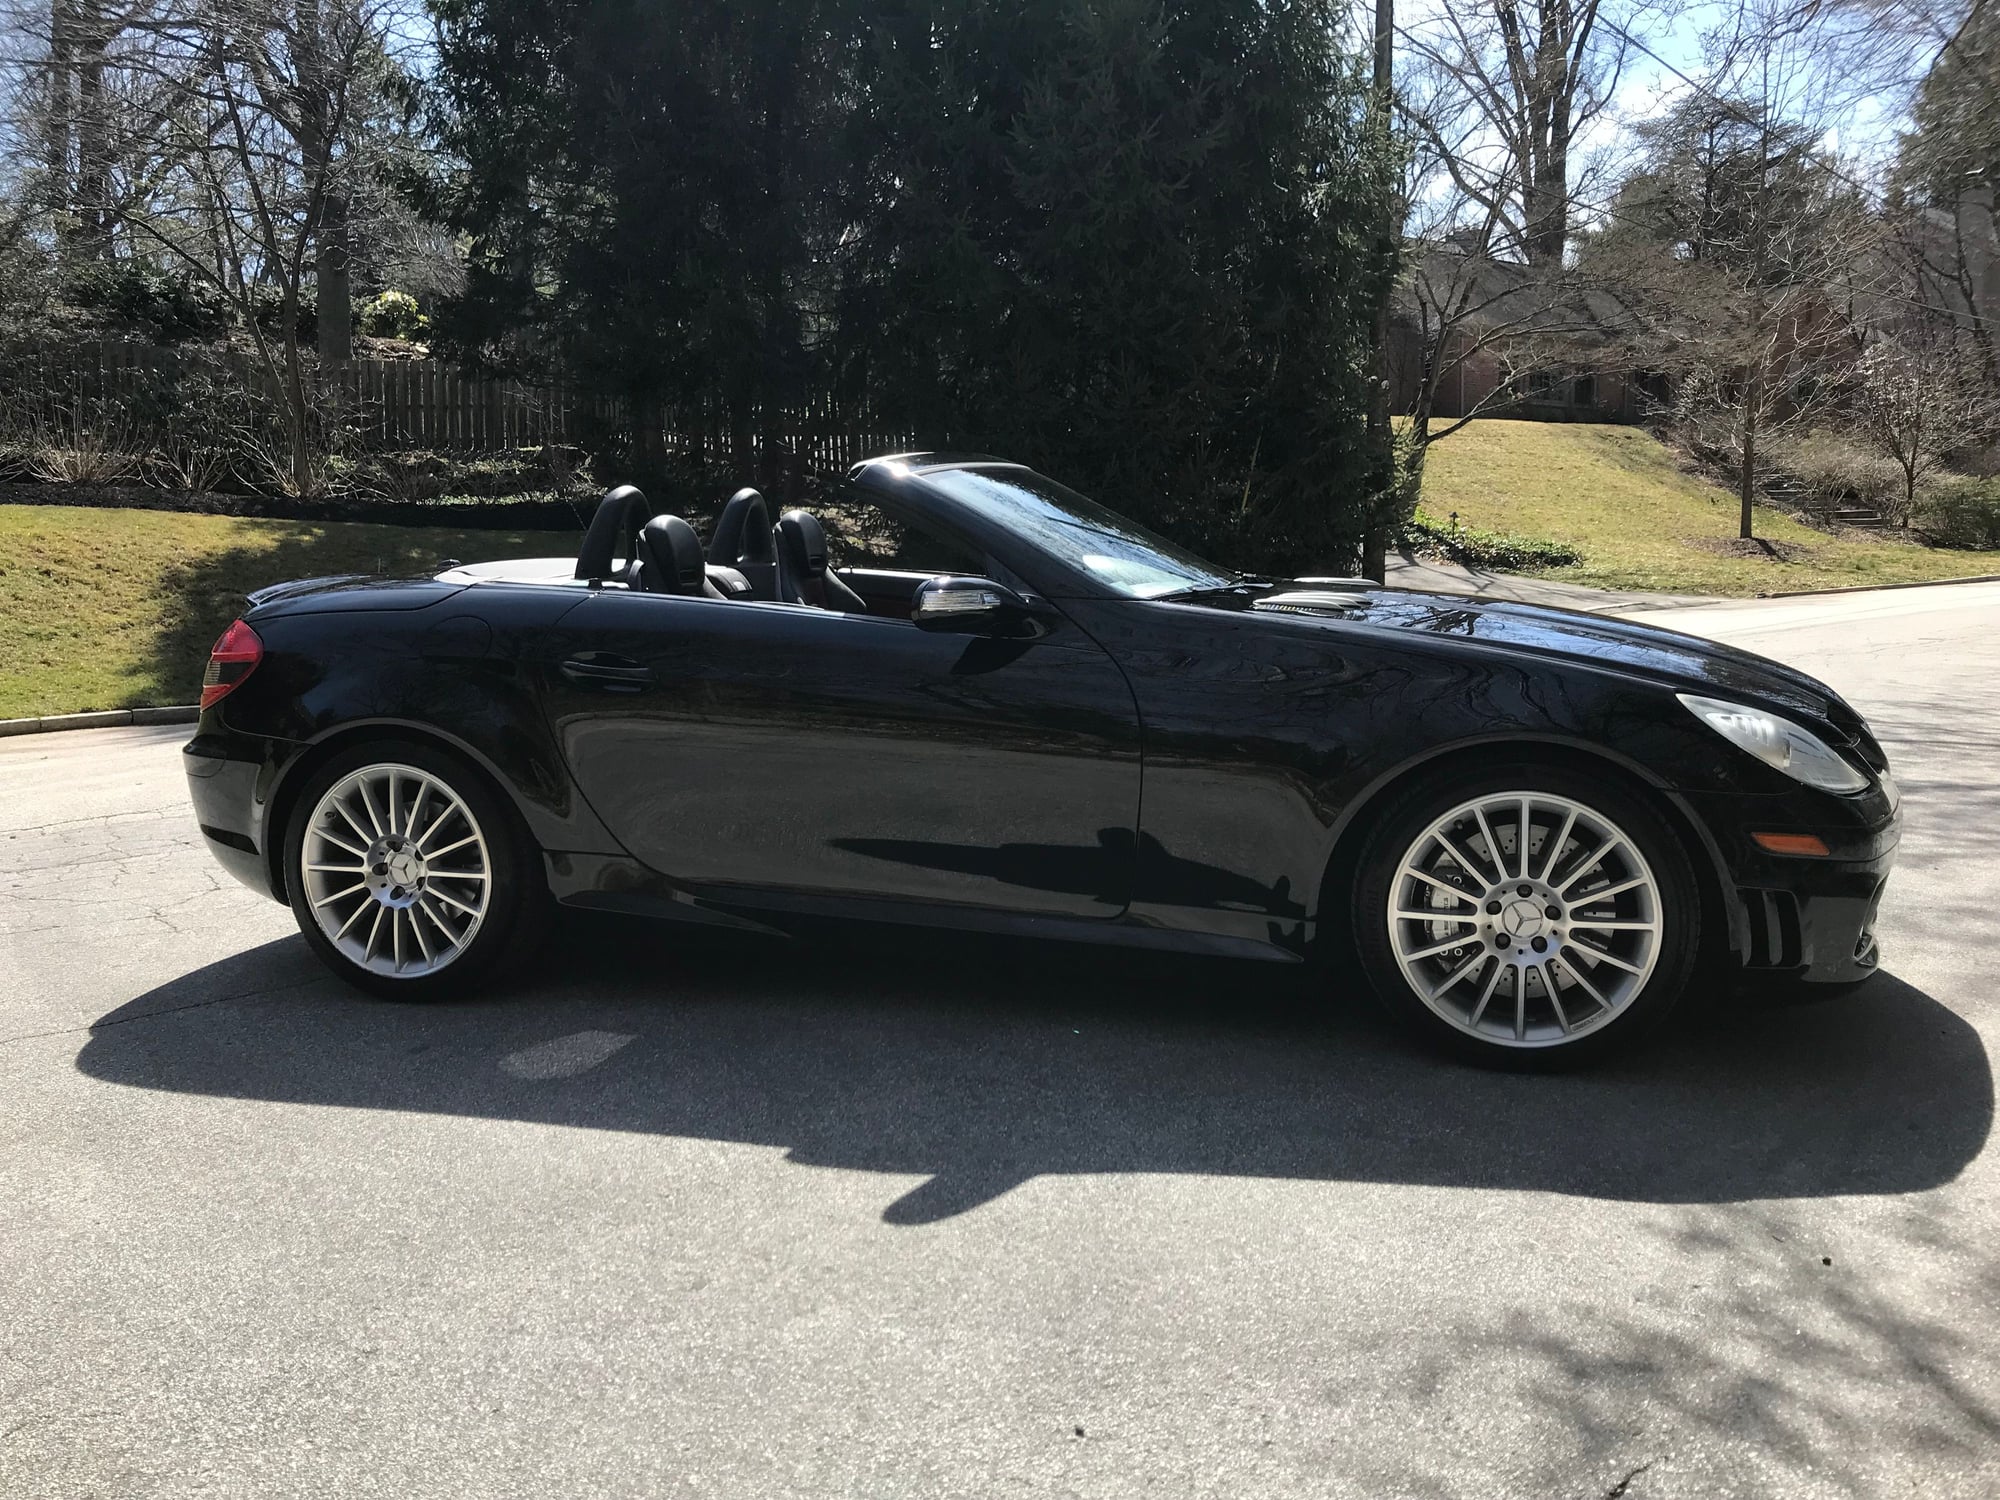 2008 Mercedes-Benz SLK55 AMG - Gorgeous SLK55 AMG, very low miles! - Used - VIN WDBWK73F48F176196 - 52 Miles - 8 cyl - 2WD - Automatic - Convertible - Black - Bryn Mawr, PA 19010, United States